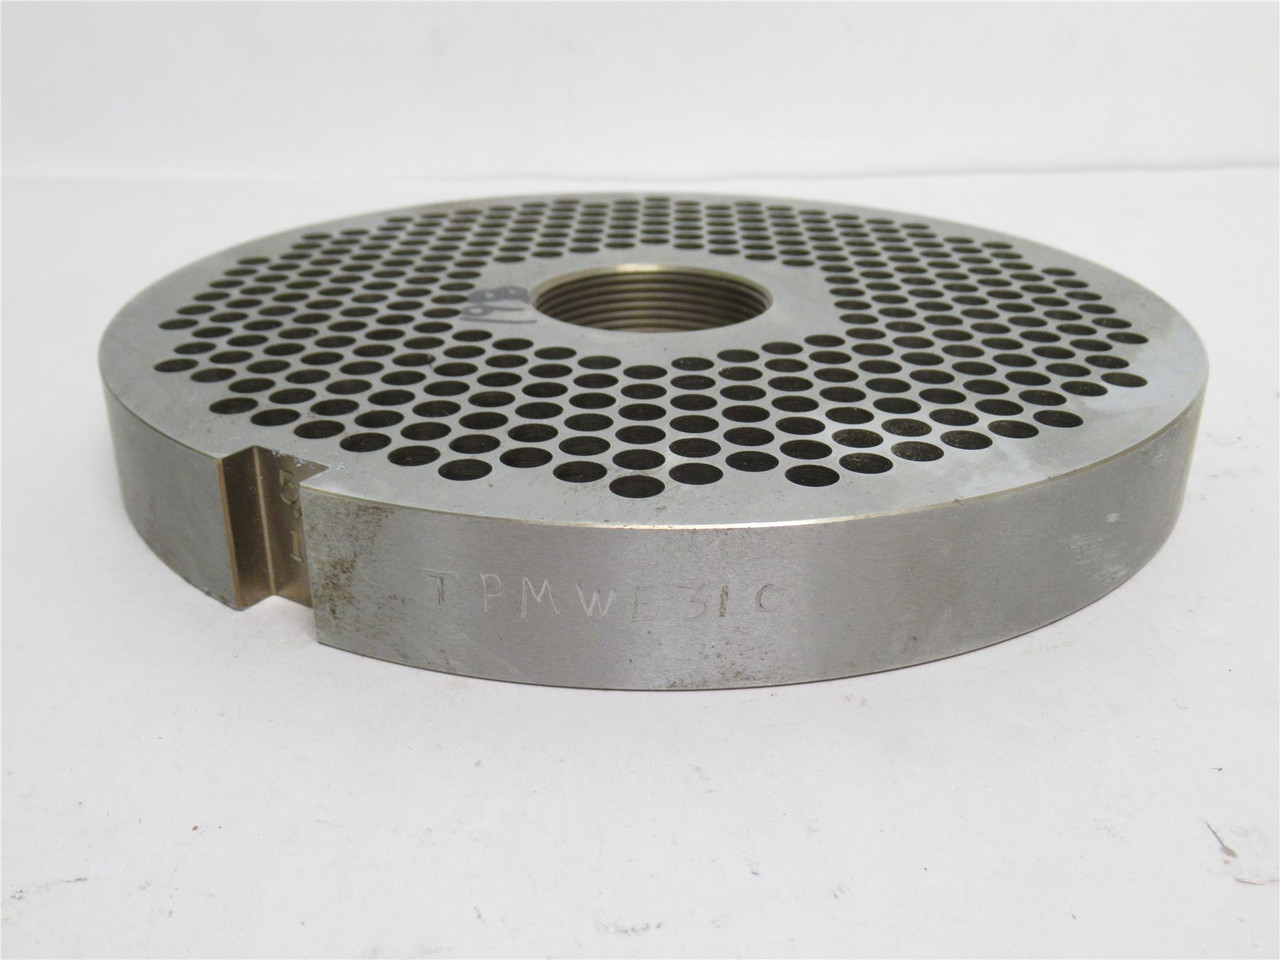 Weiler 105-1008; Grinder Plate TPMWE310; 5/16" Hole ID